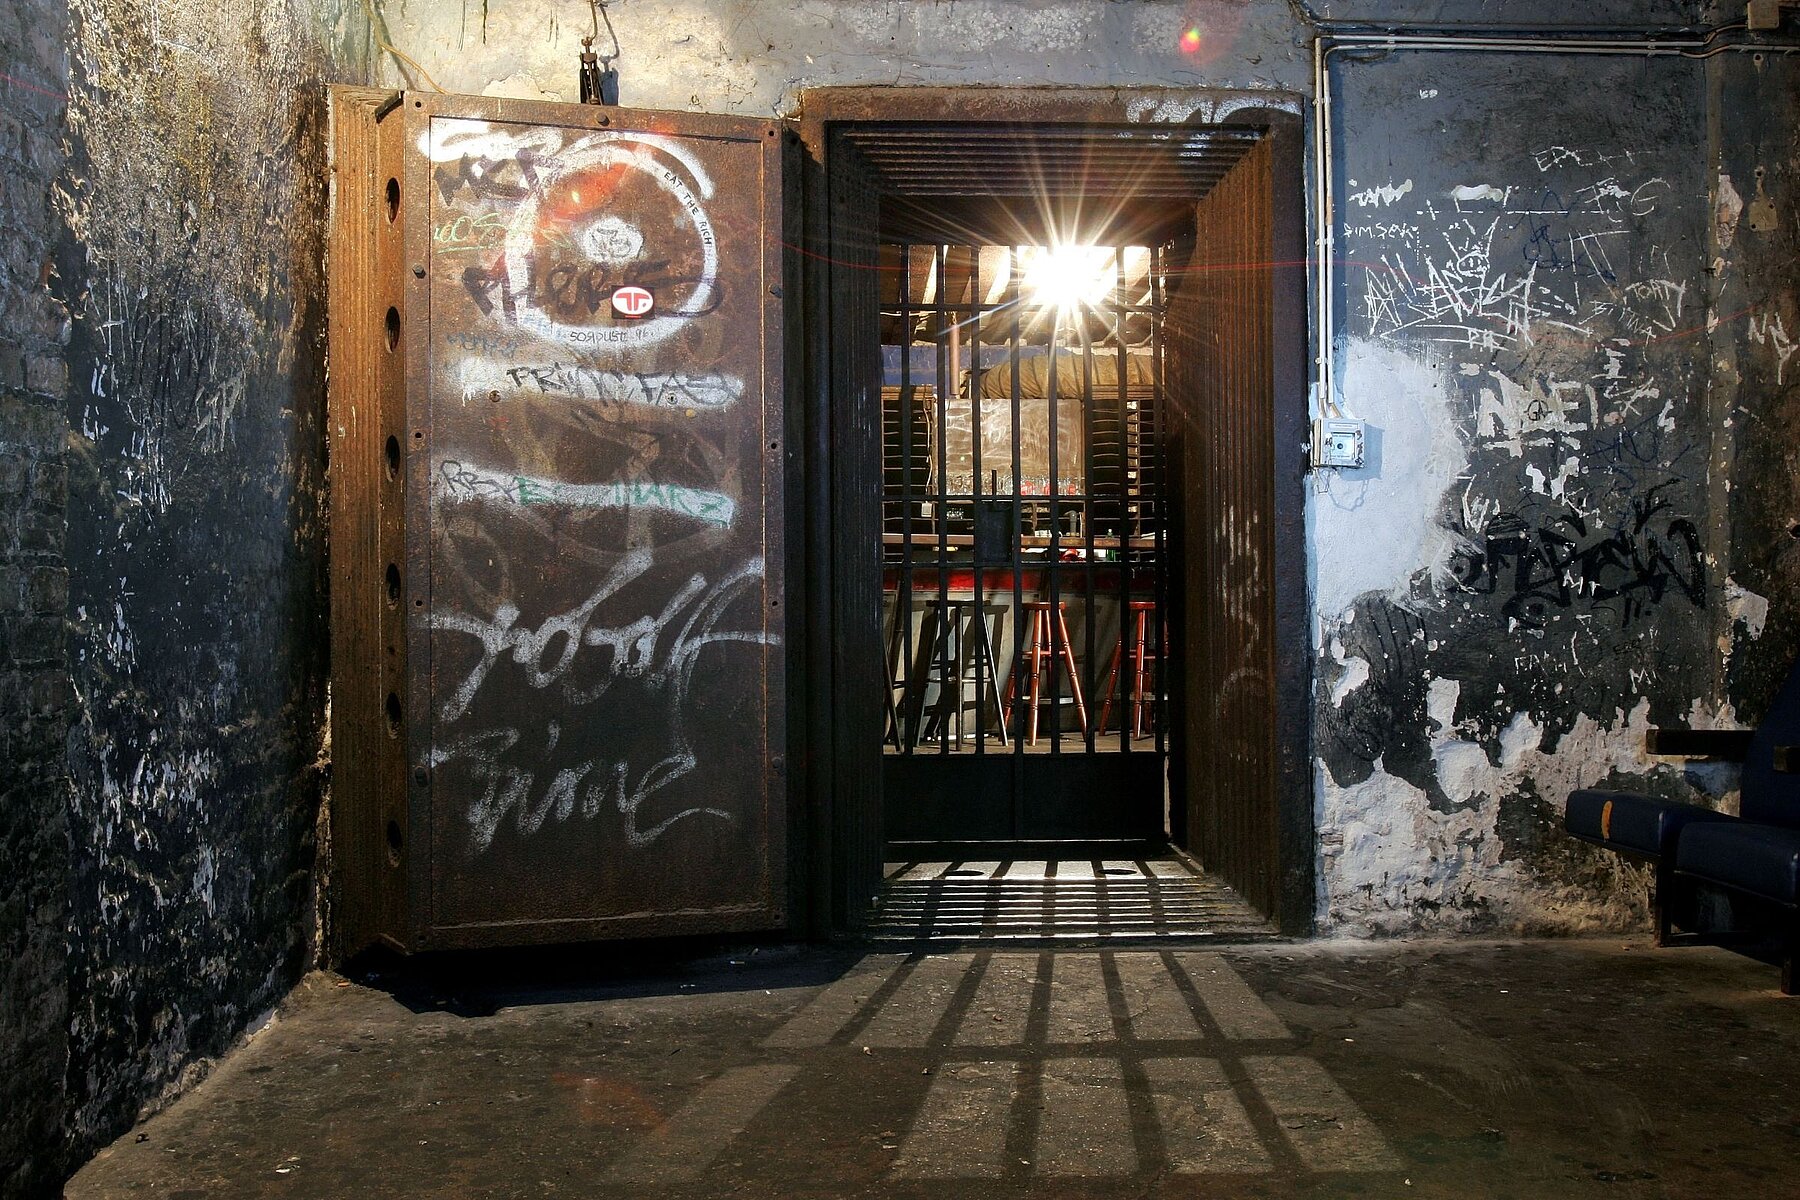 A heavy iron safe door stands open. It is located in a room where the paint is peeling off the walls. Behind the door is a grille through which light shines. 